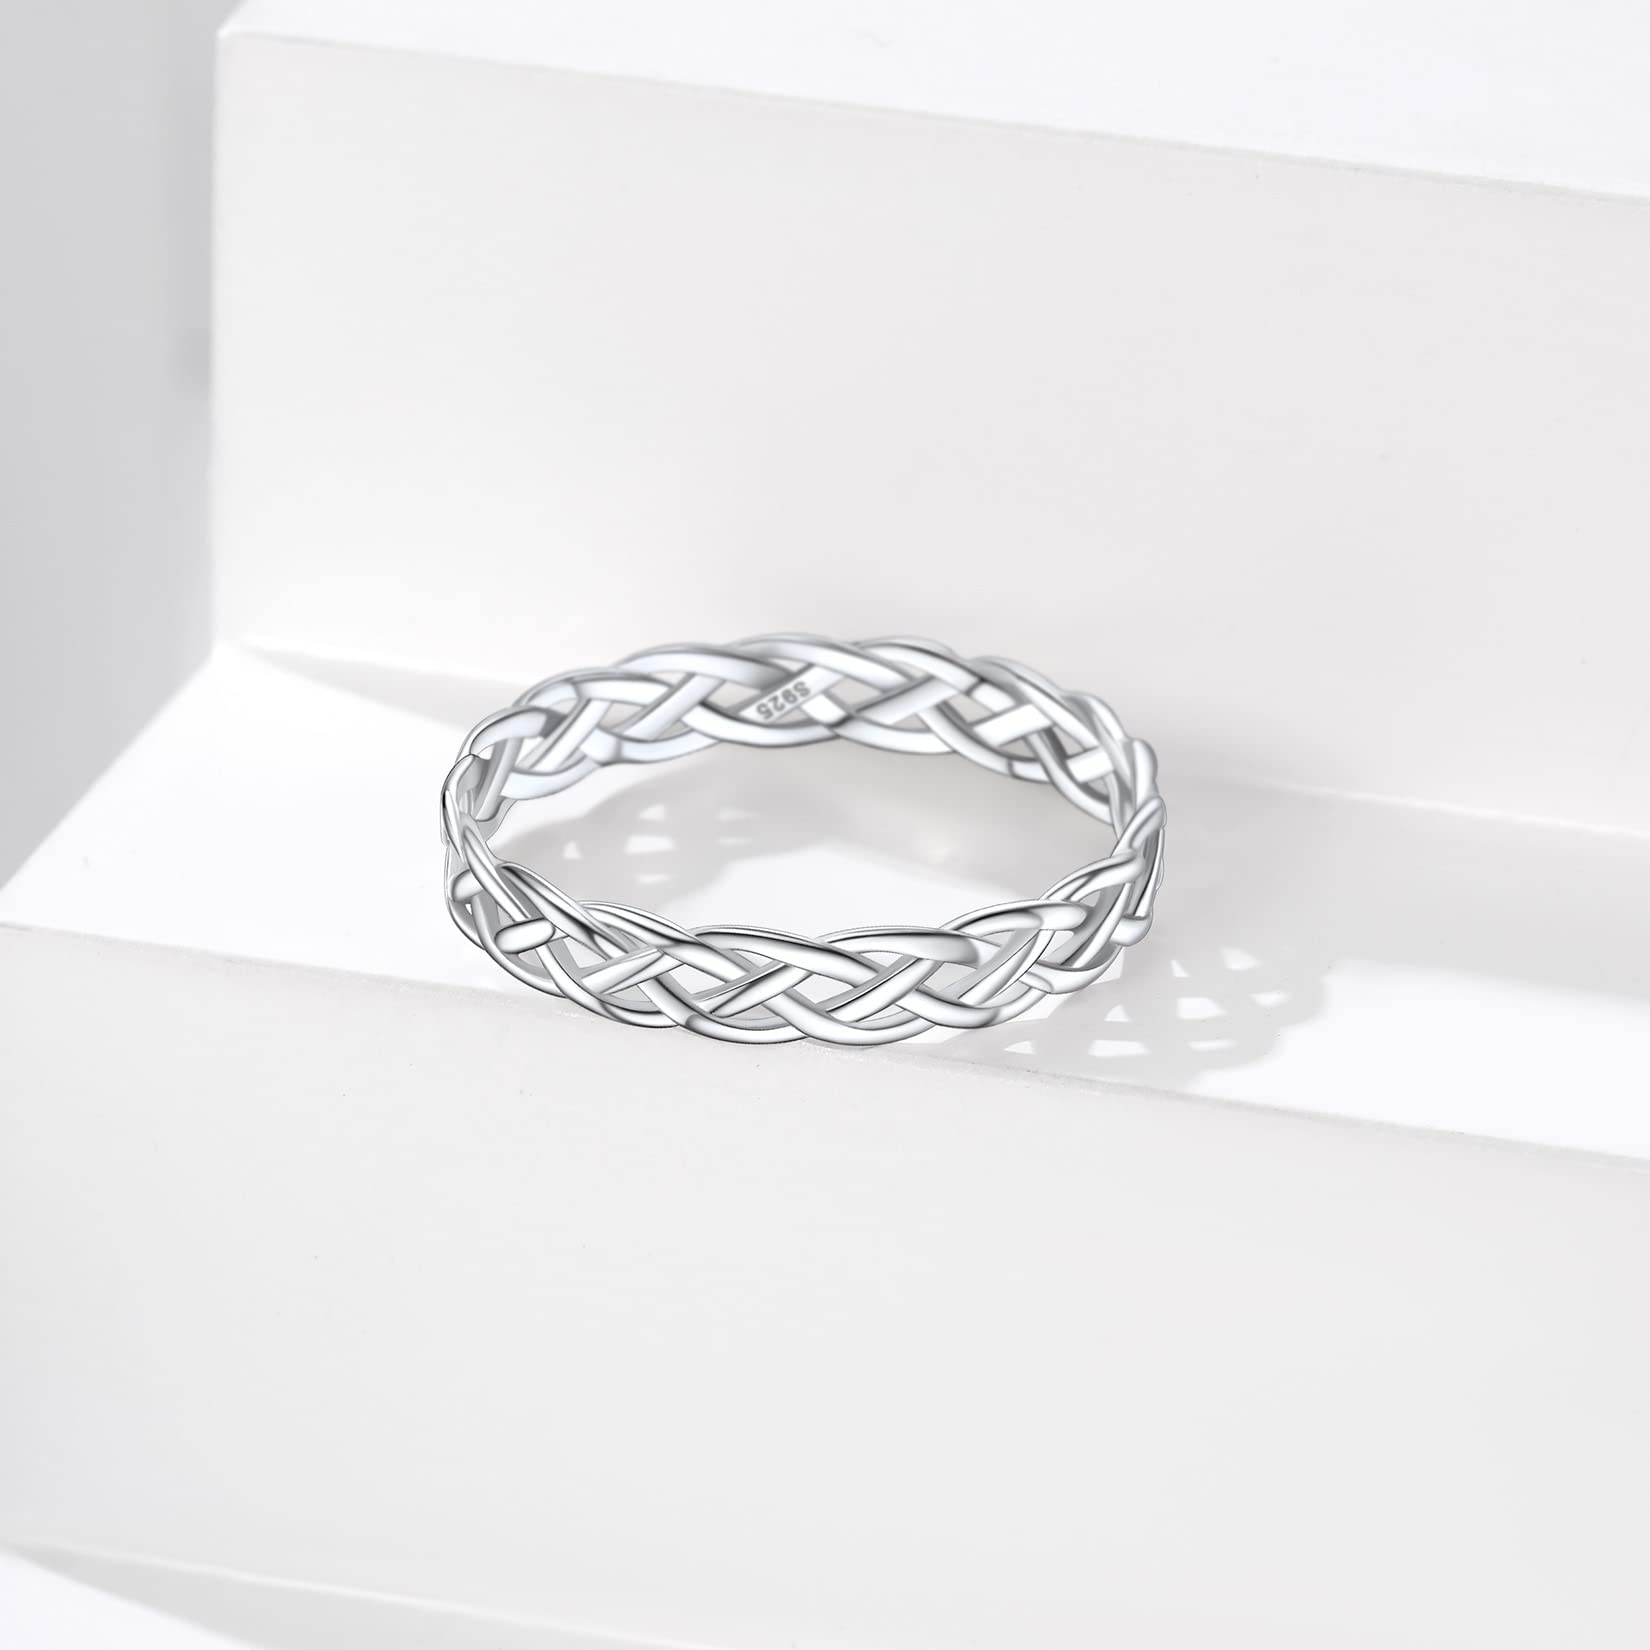 Silvora Sterling Silver Sturdy Celtic Knot/Cuban Link Chain Rings for Women Men Vintage Eternity Band Ring Jewelry Size 4-12